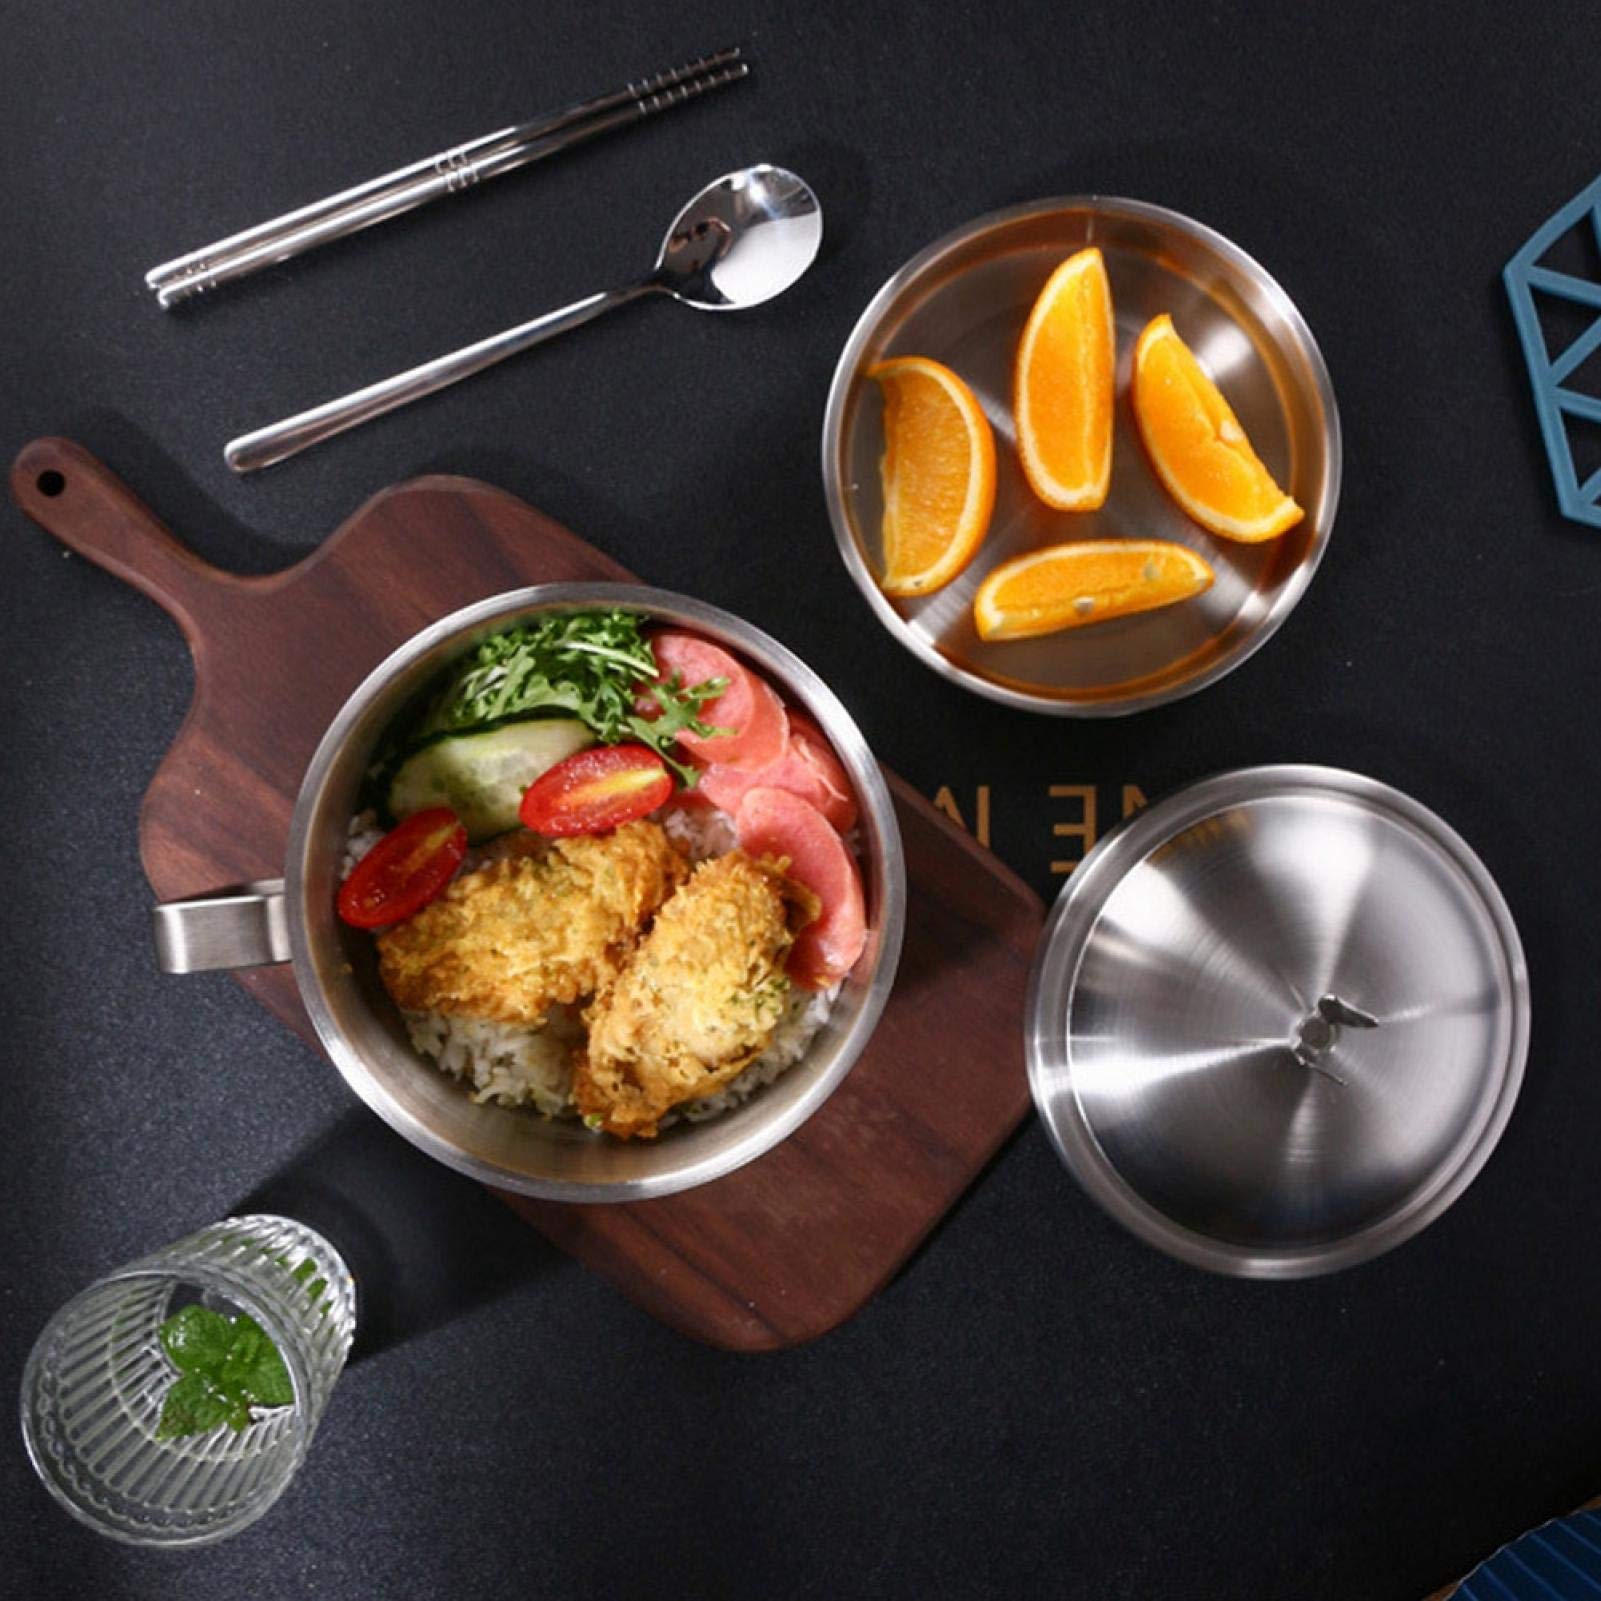 Noodle Bowl, 1000ML Pasta Bowls Stainless Steel Noodle Bowl, Soup Bowls Home Restaurant for Dormitory Family